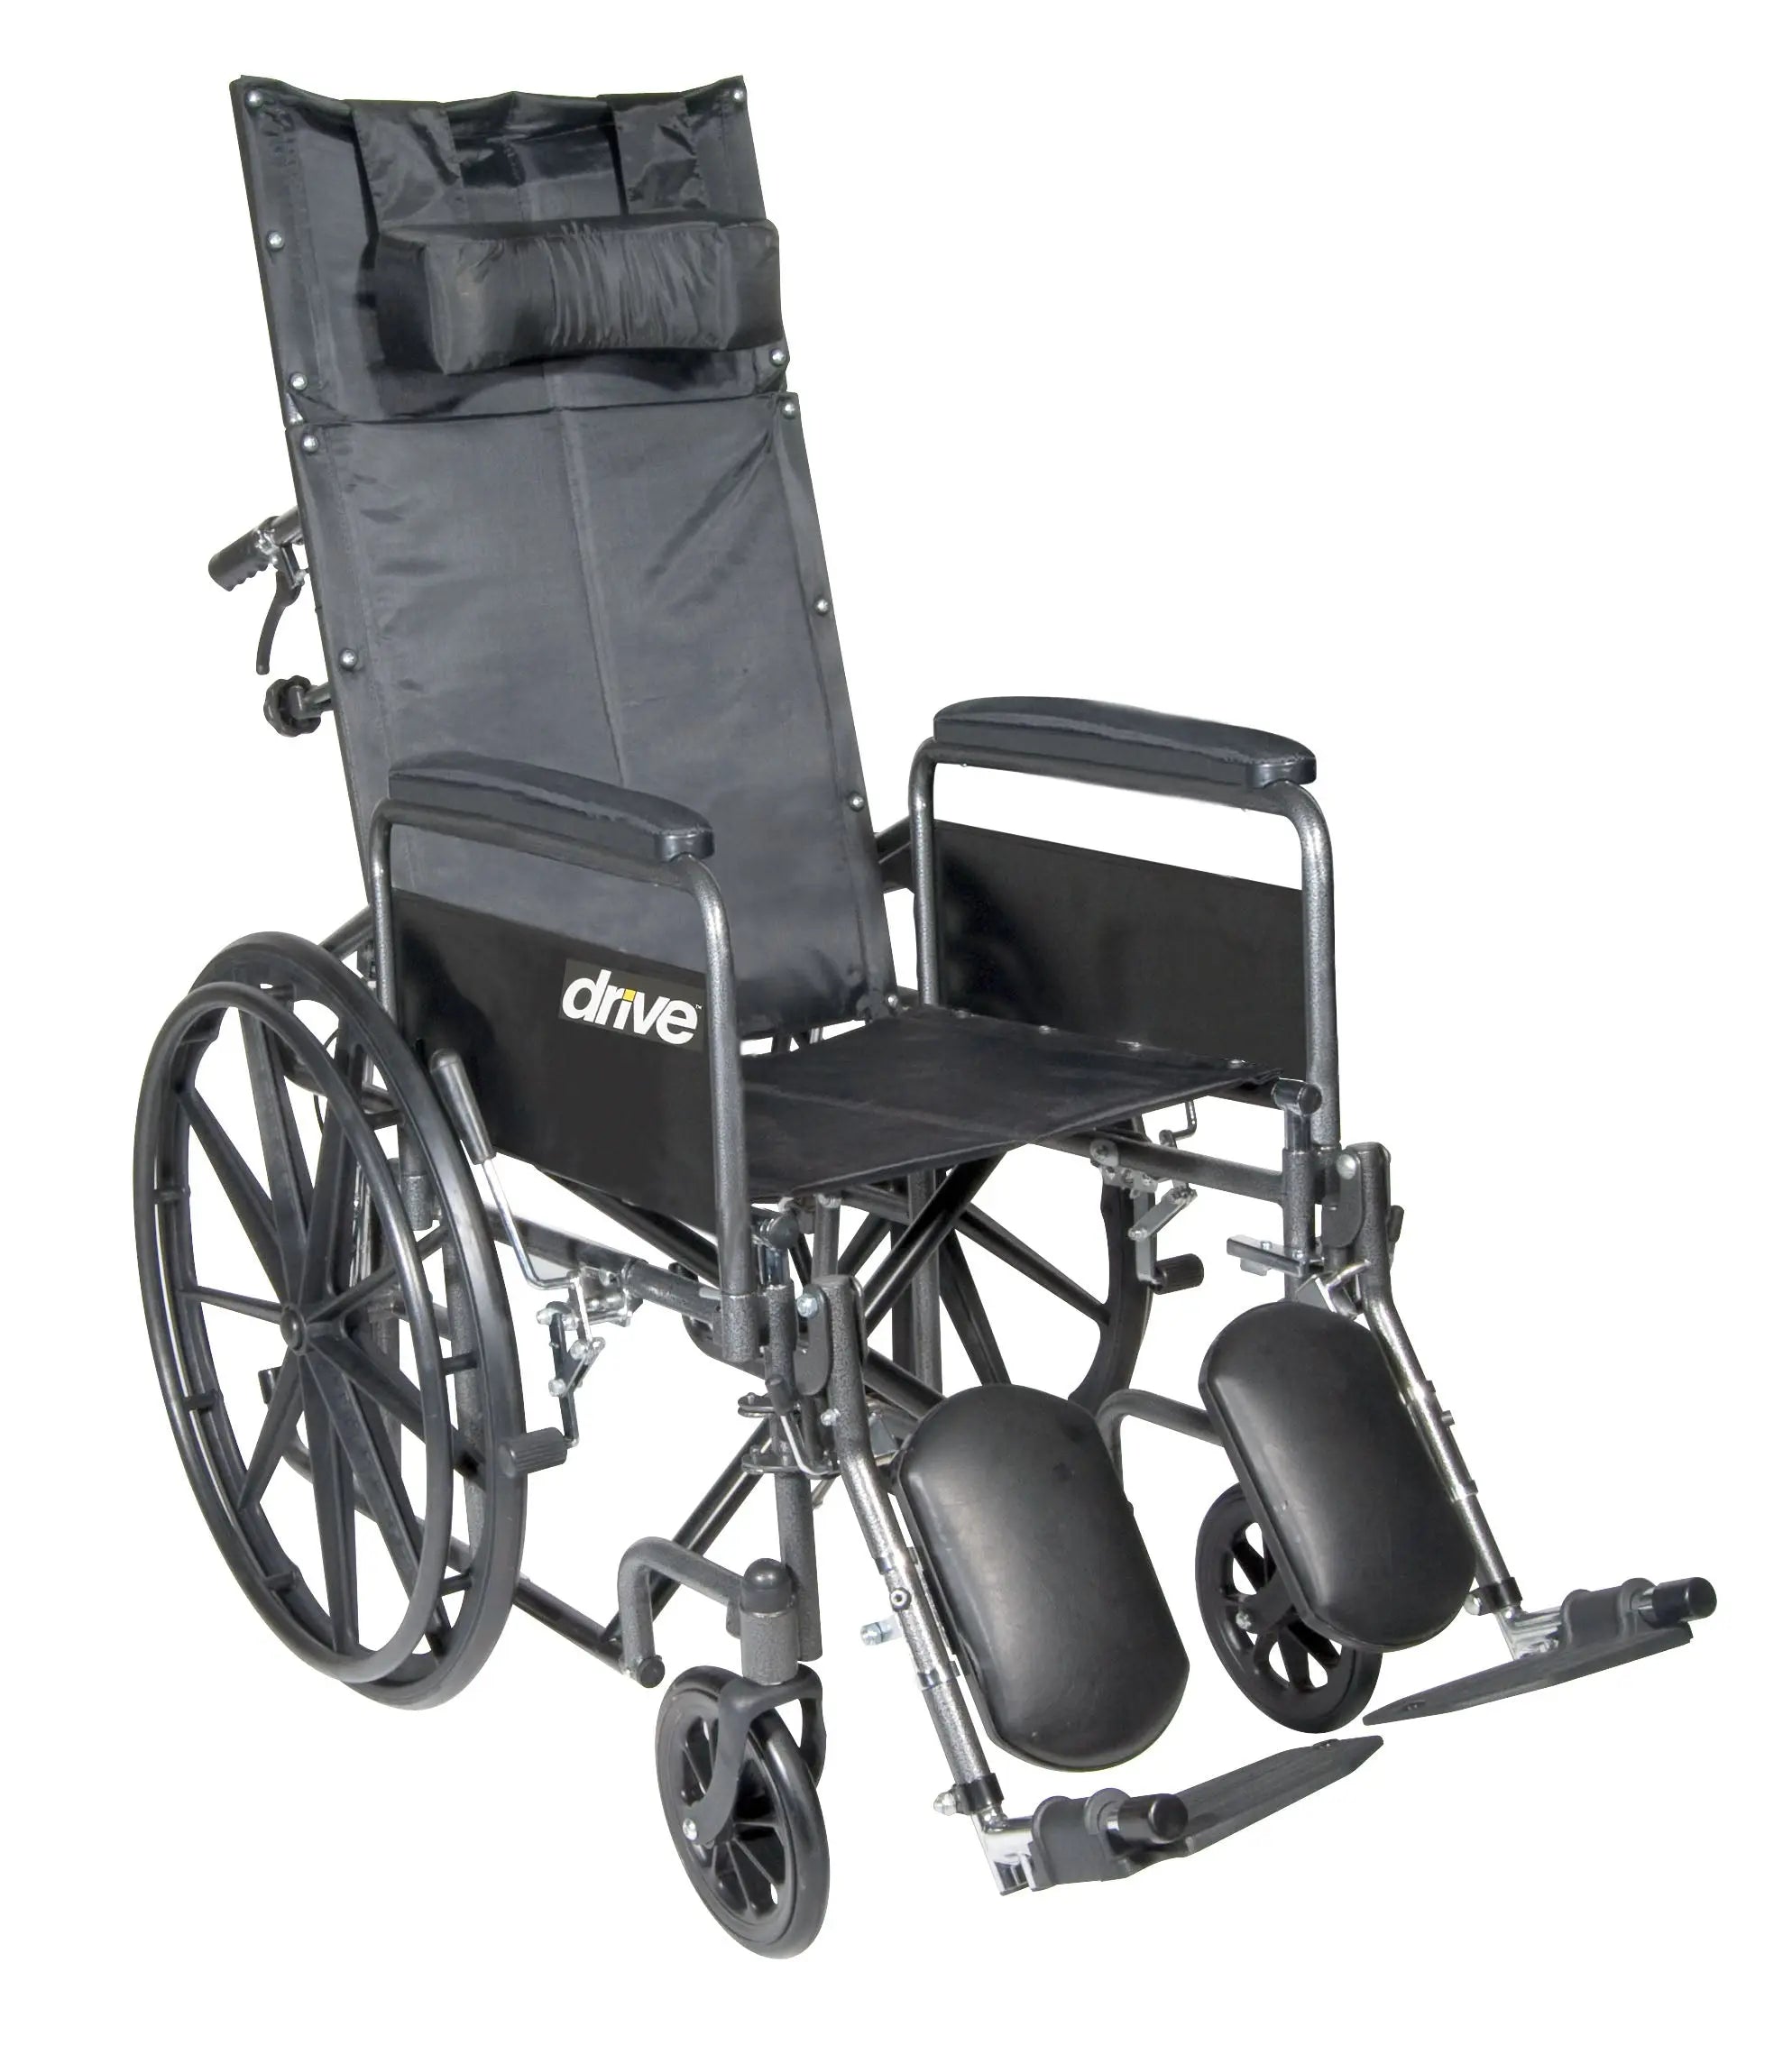 Silver Sport Reclining Wheelchair with Elevating Leg Rests - Home Health Store Inc